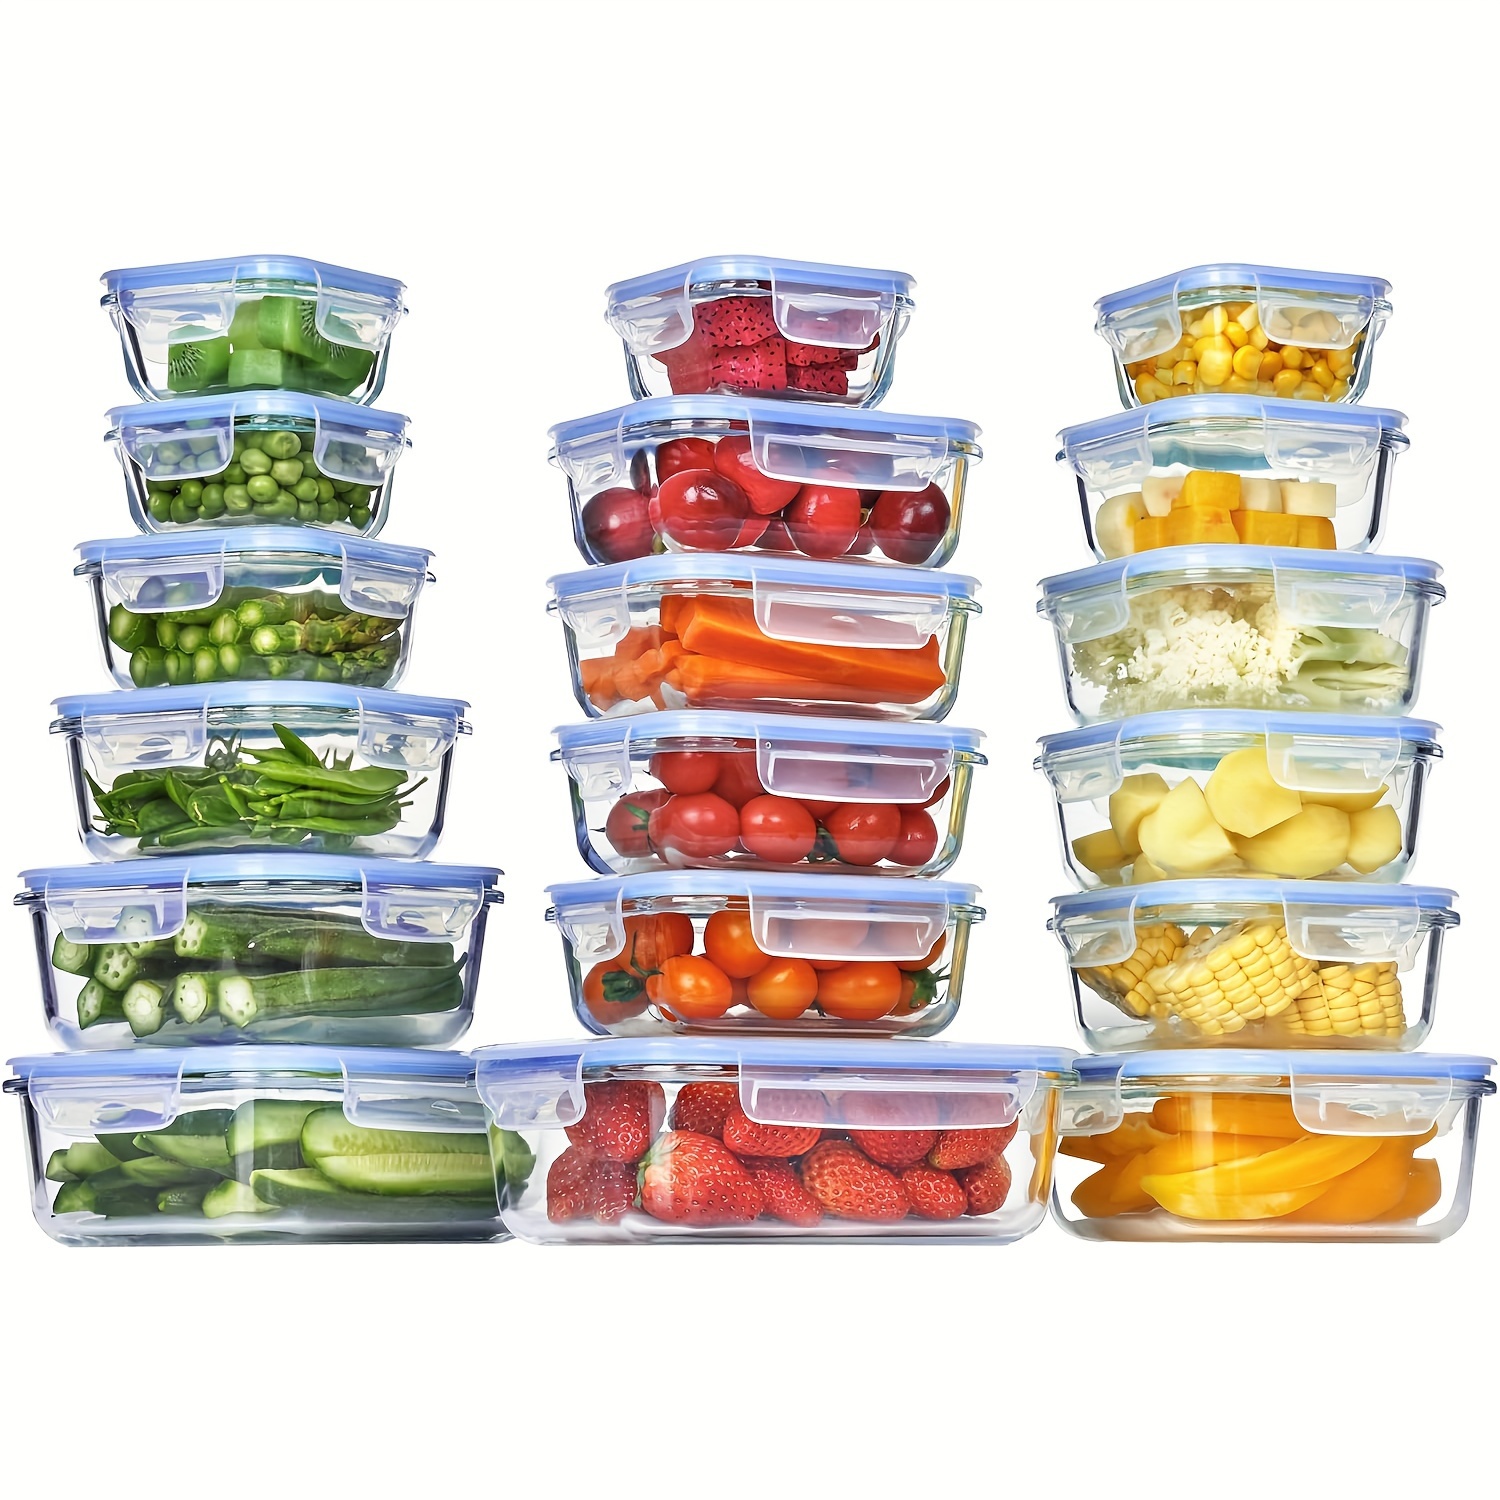 

Vtopmart 18pack Glass Food Storage Containers With Lids, Meal Prep Containers, Airtight Lunch Containers Bento Boxes With Leak Proof Locking Lids For Microwave, Oven, Freezer, Dishwasher